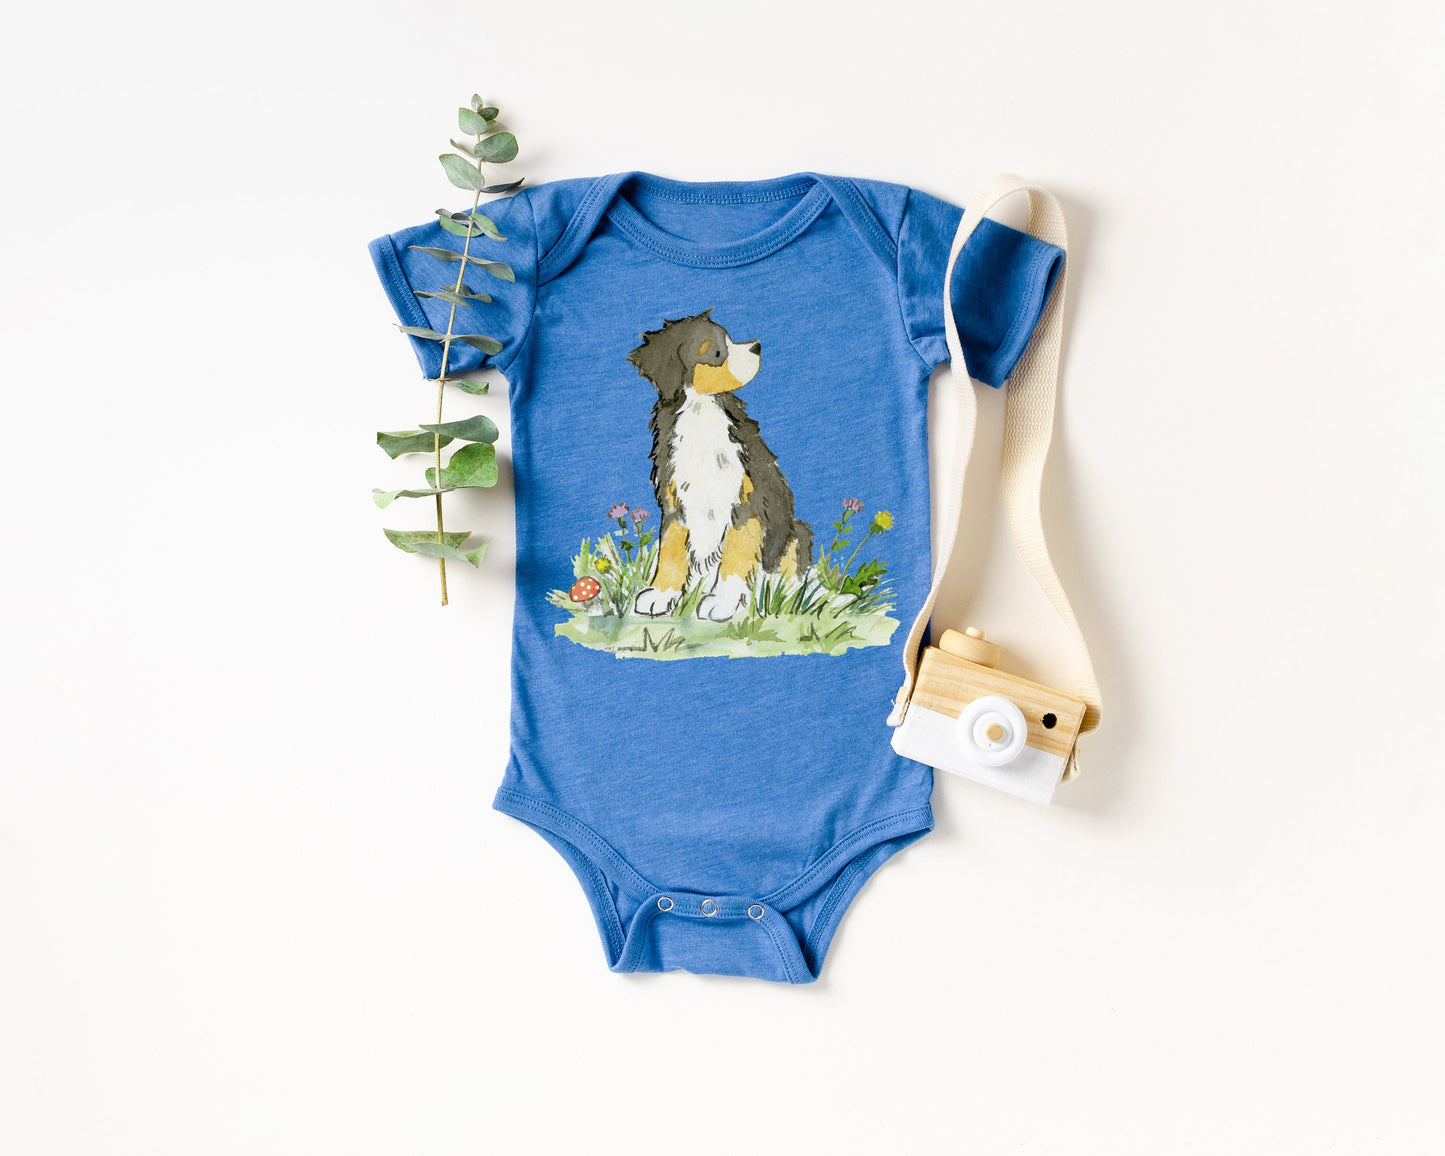 Blue colored infant bodysuit with artwork of a cute Bernese Mountain Dog on it.